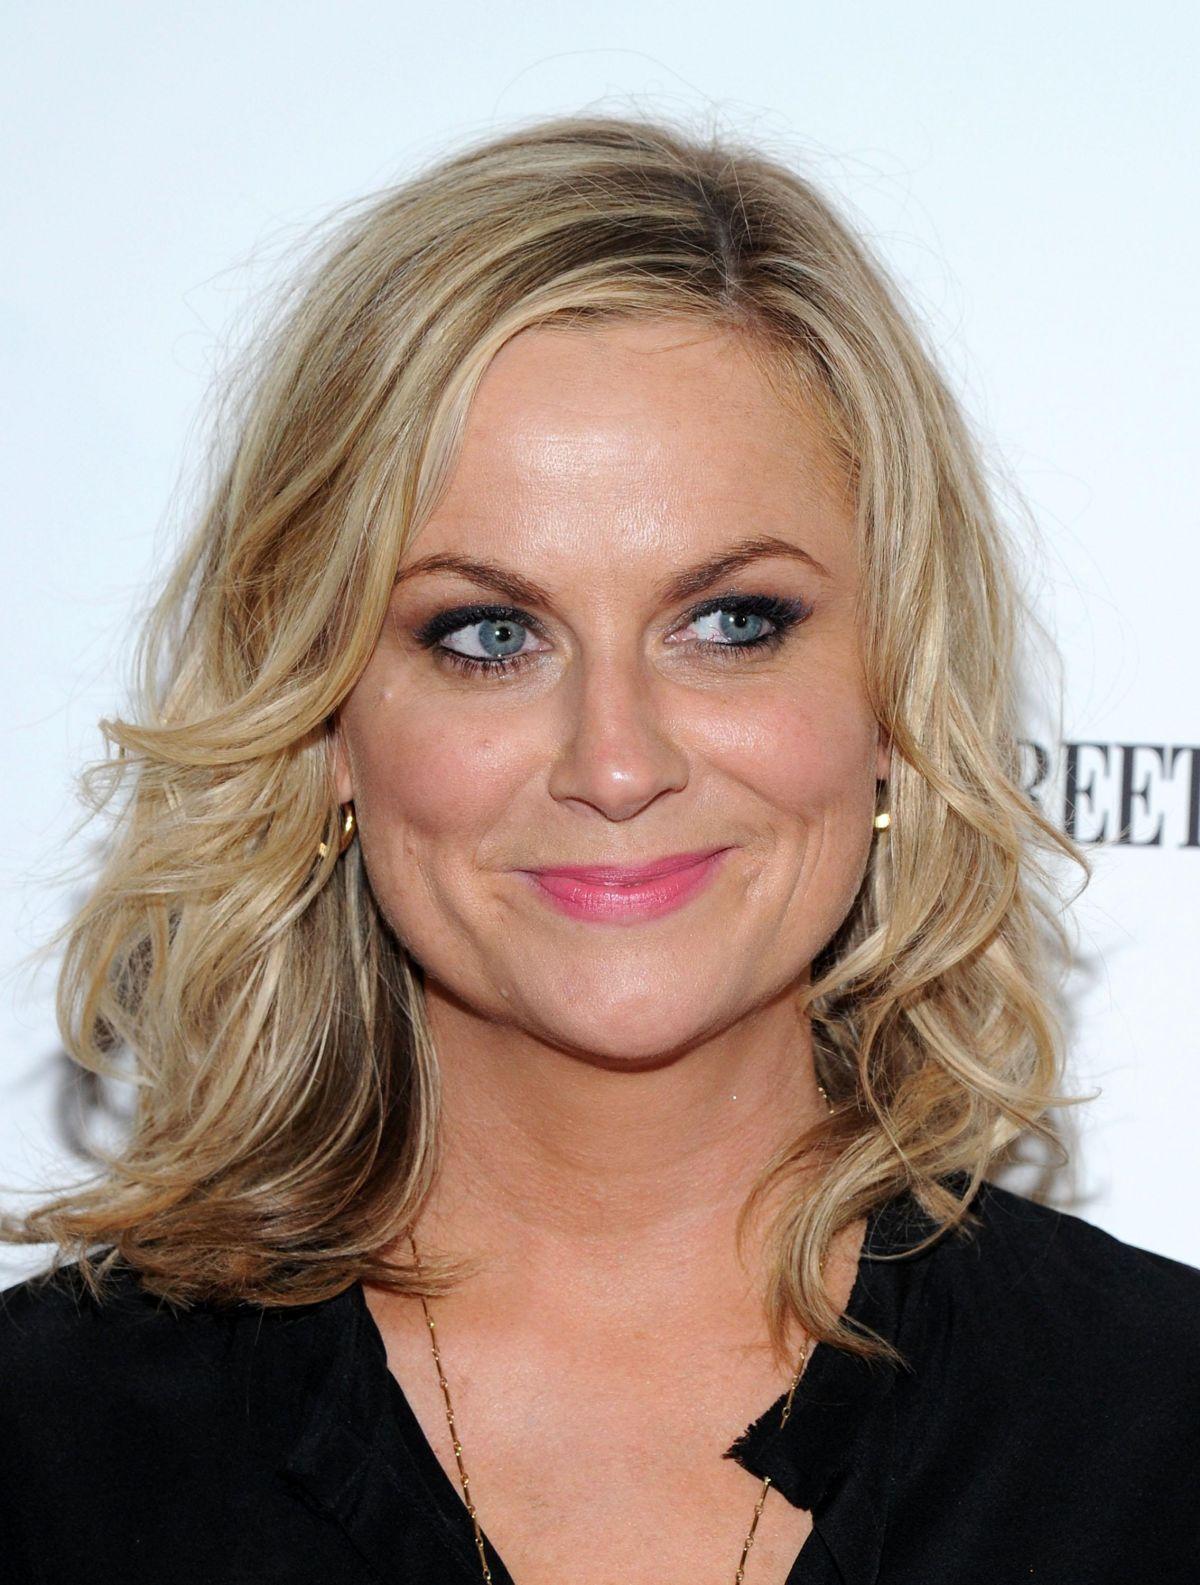 Amy Poehler Wallpaper High Quality